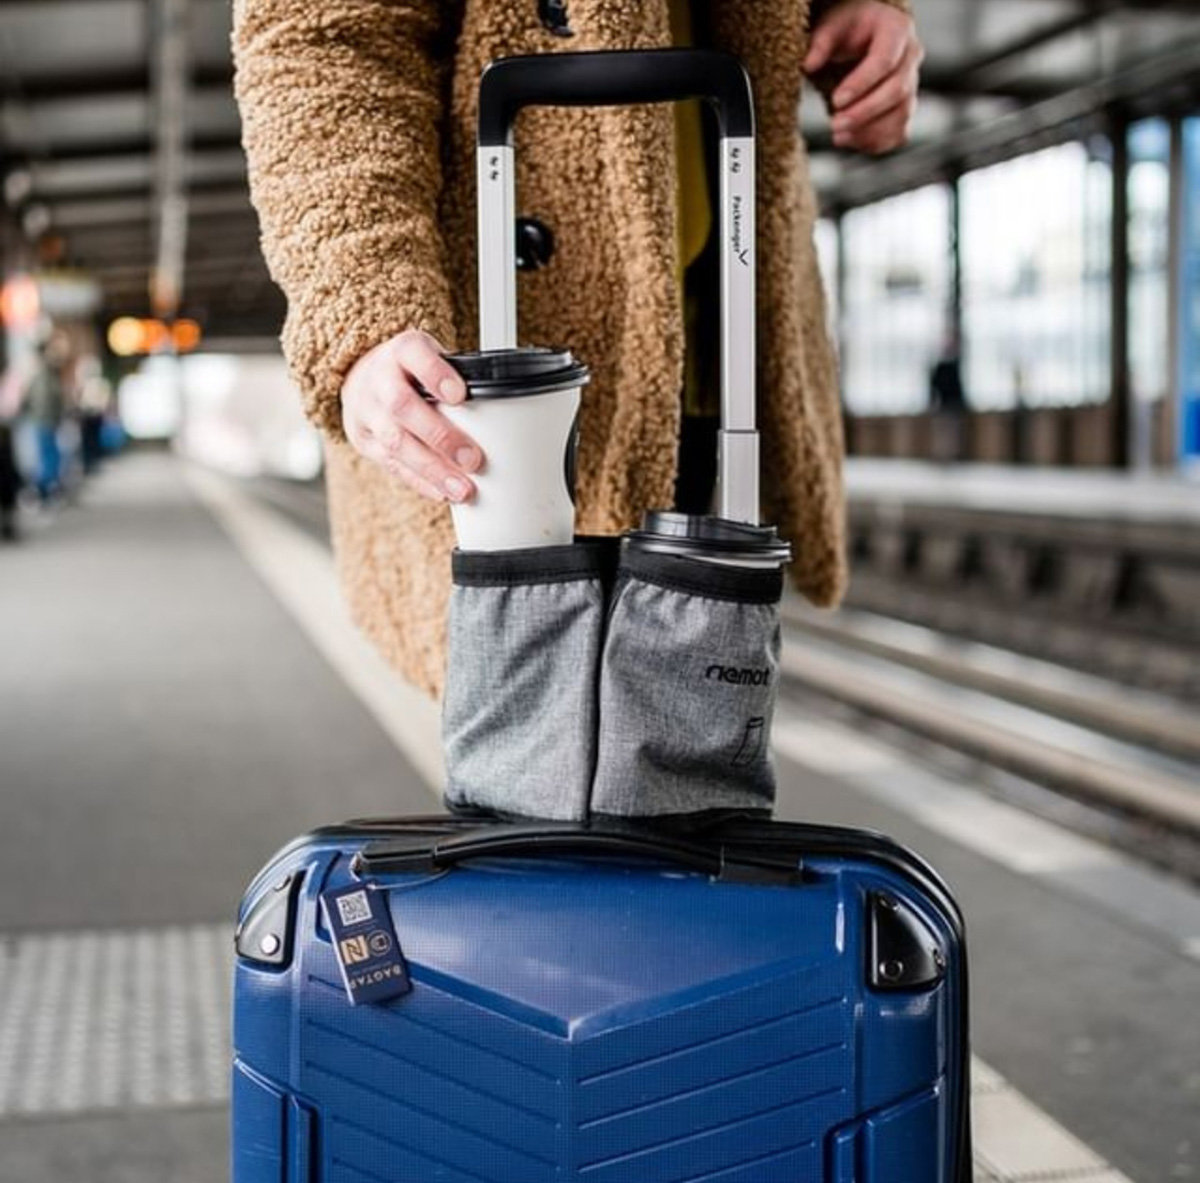 The Best Travel Items To Get You On The Move This Fall Season